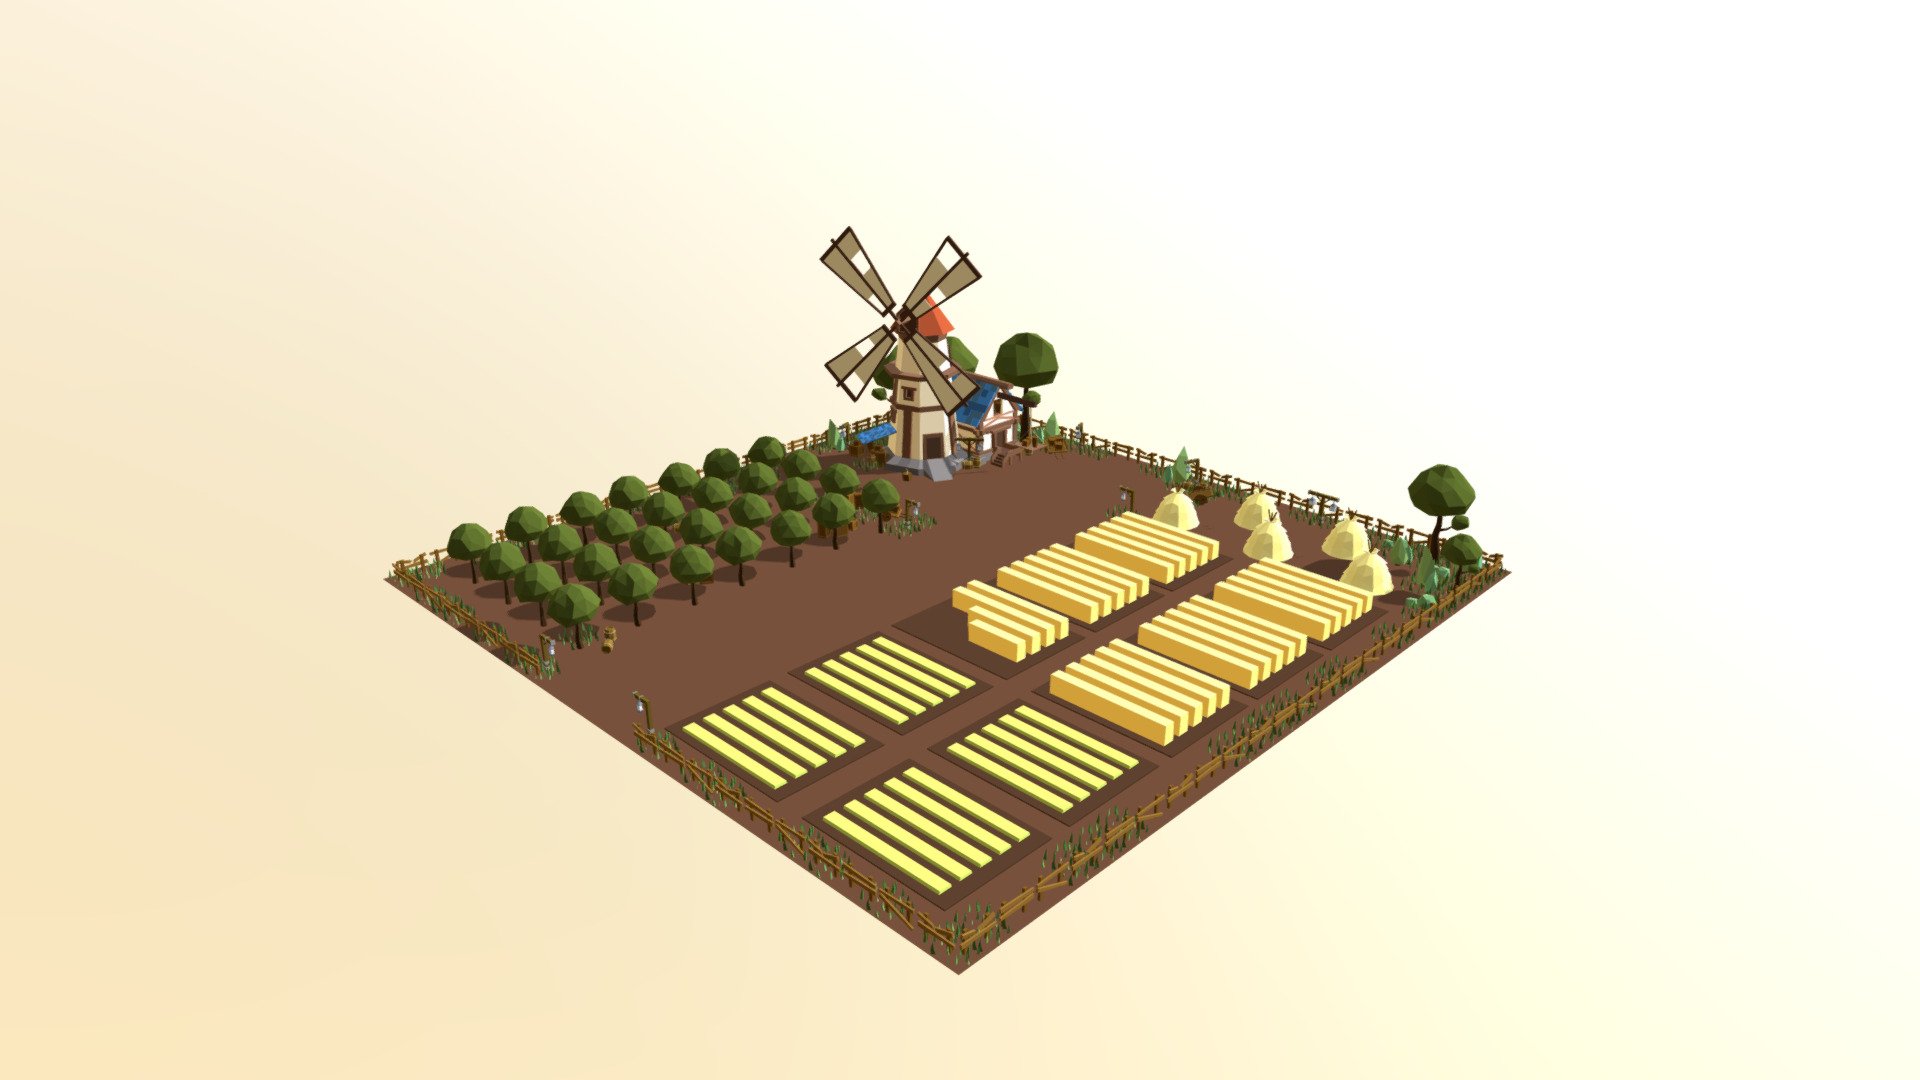 Farm Tile, one of the Tiles used in a game being made as a school project(ManagemyKingdom).

Asset is made in low poly and the material is simple solid colors 3d model